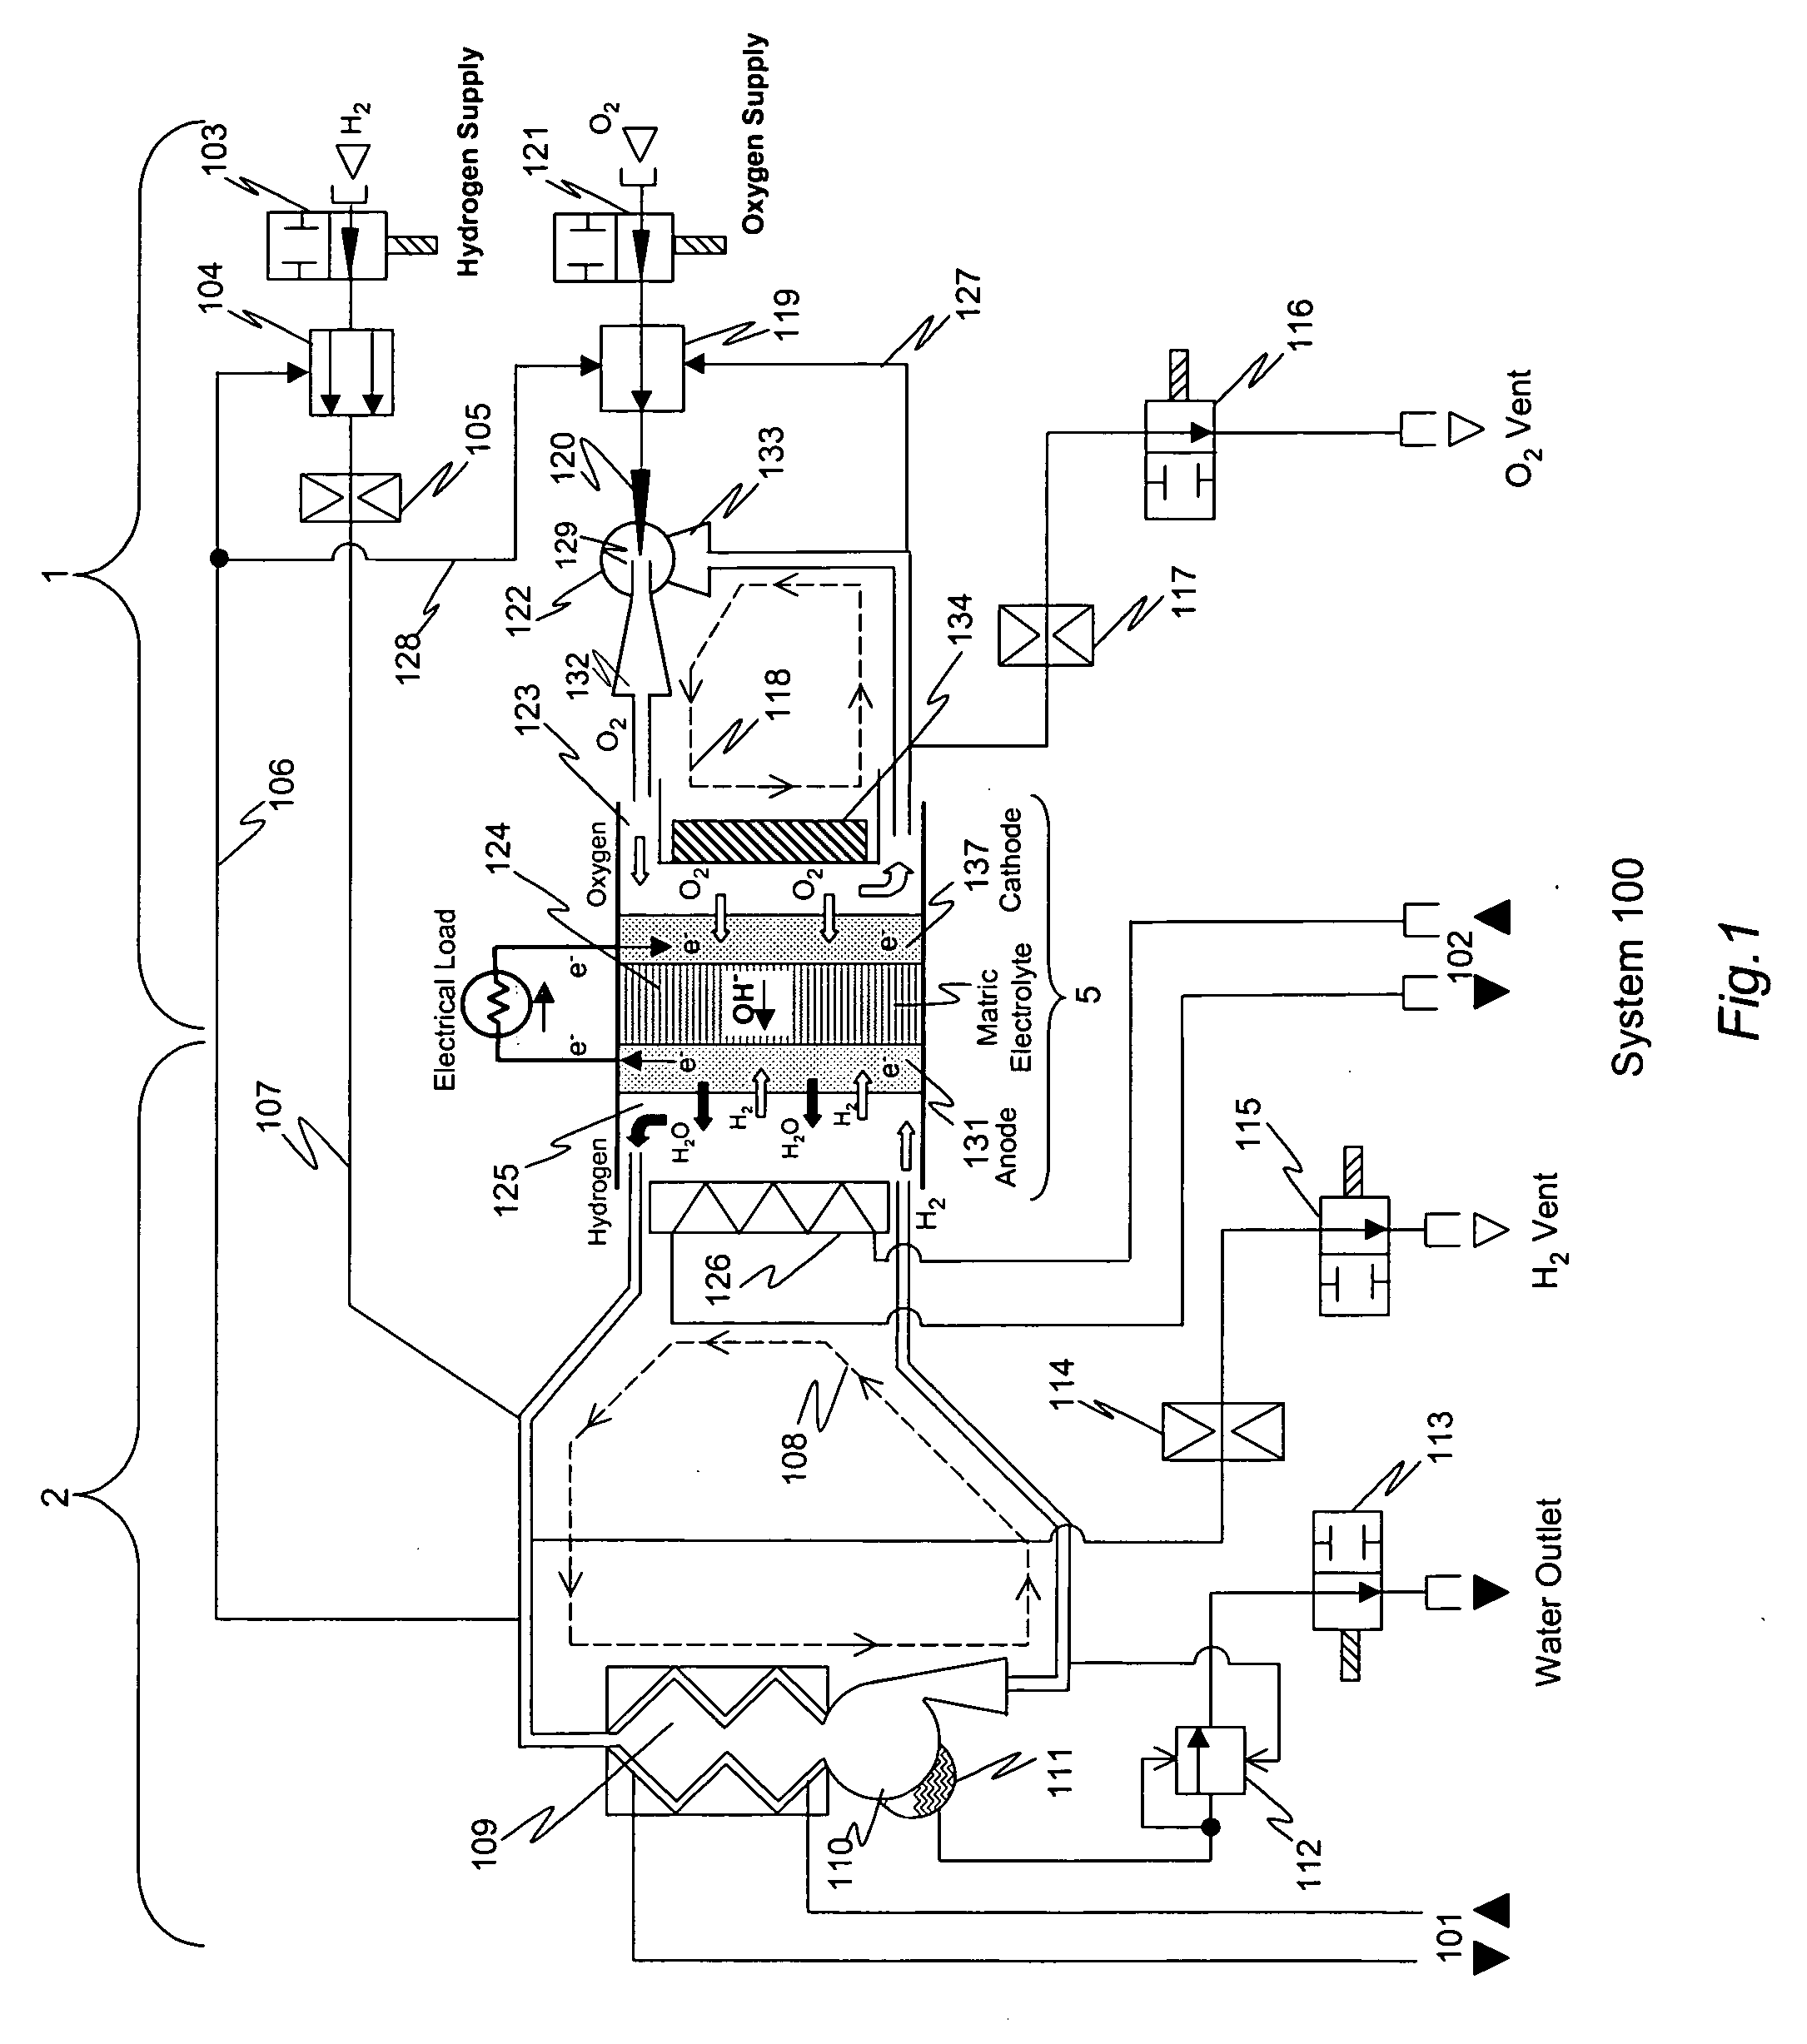 Alkaline electrolyte fuel cells with improved hydrogen-oxygen supply system